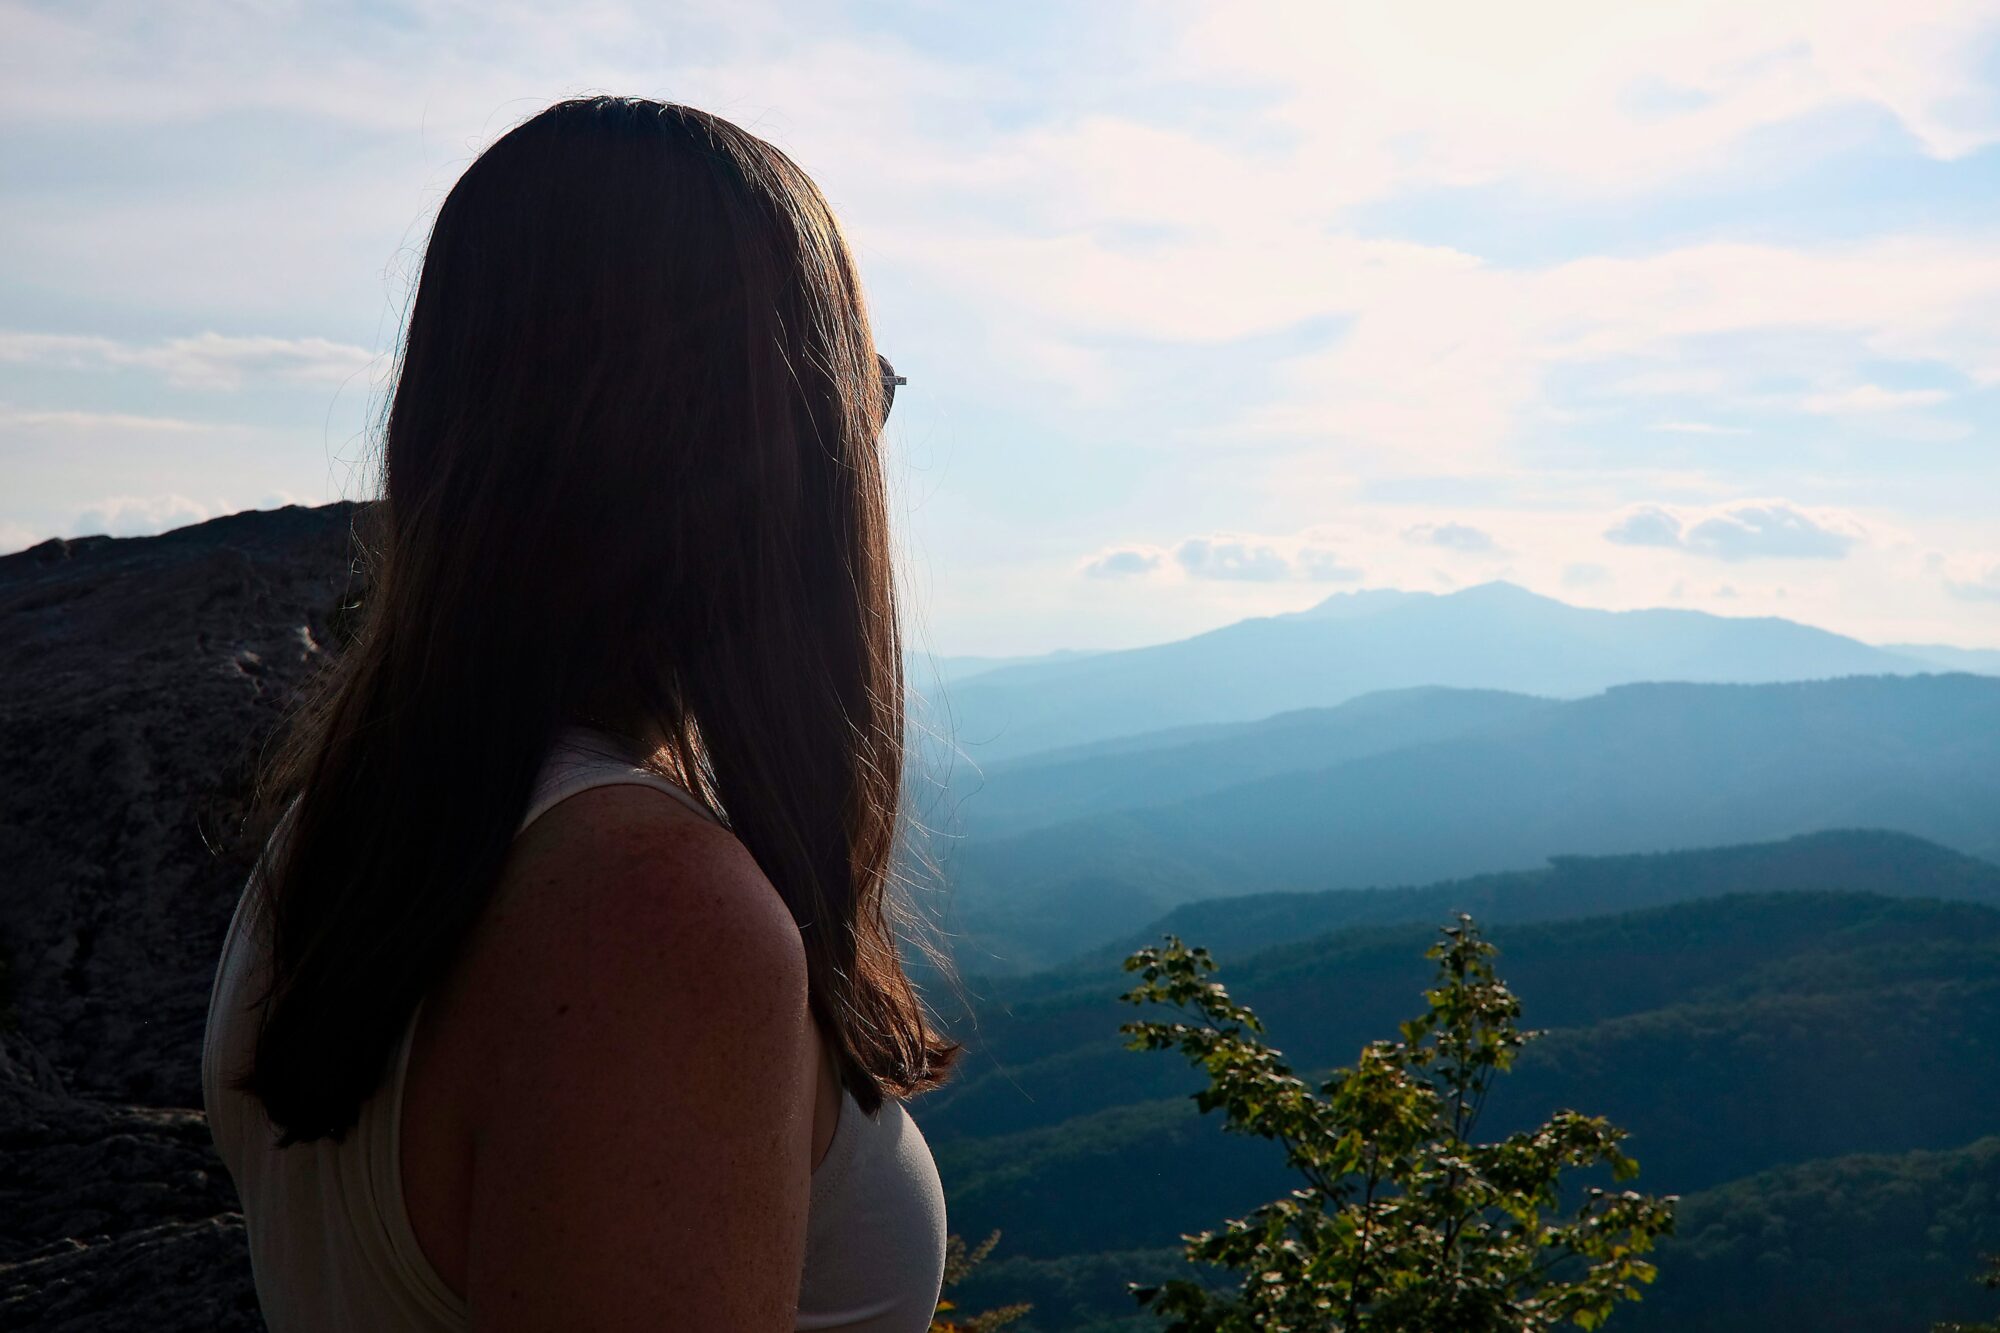 Alyssa looks out at The Blowing Rock